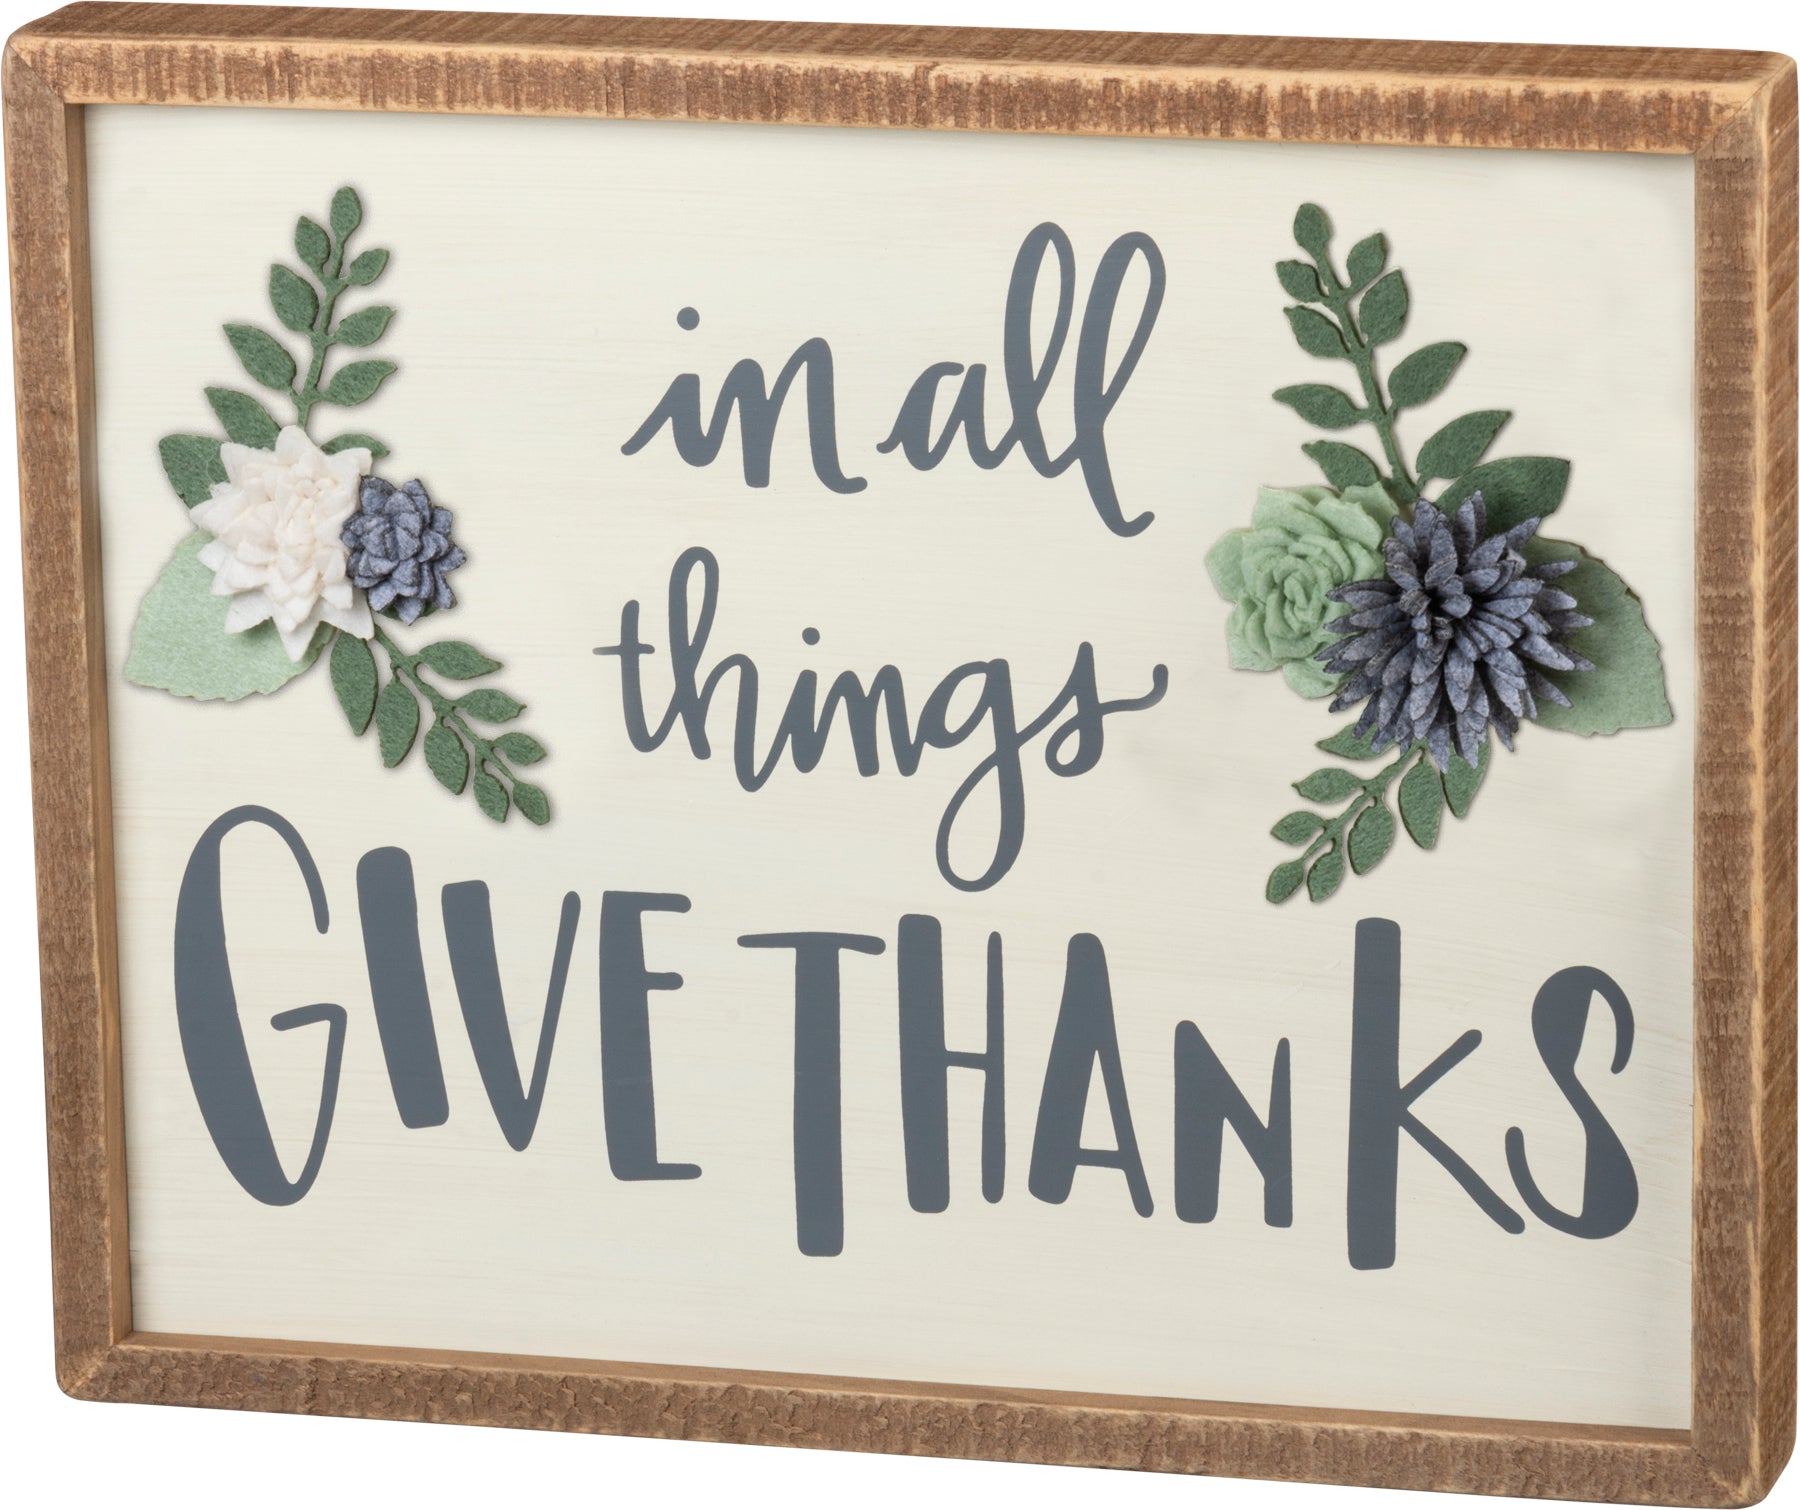 Inset Box Sign-Give Thanks